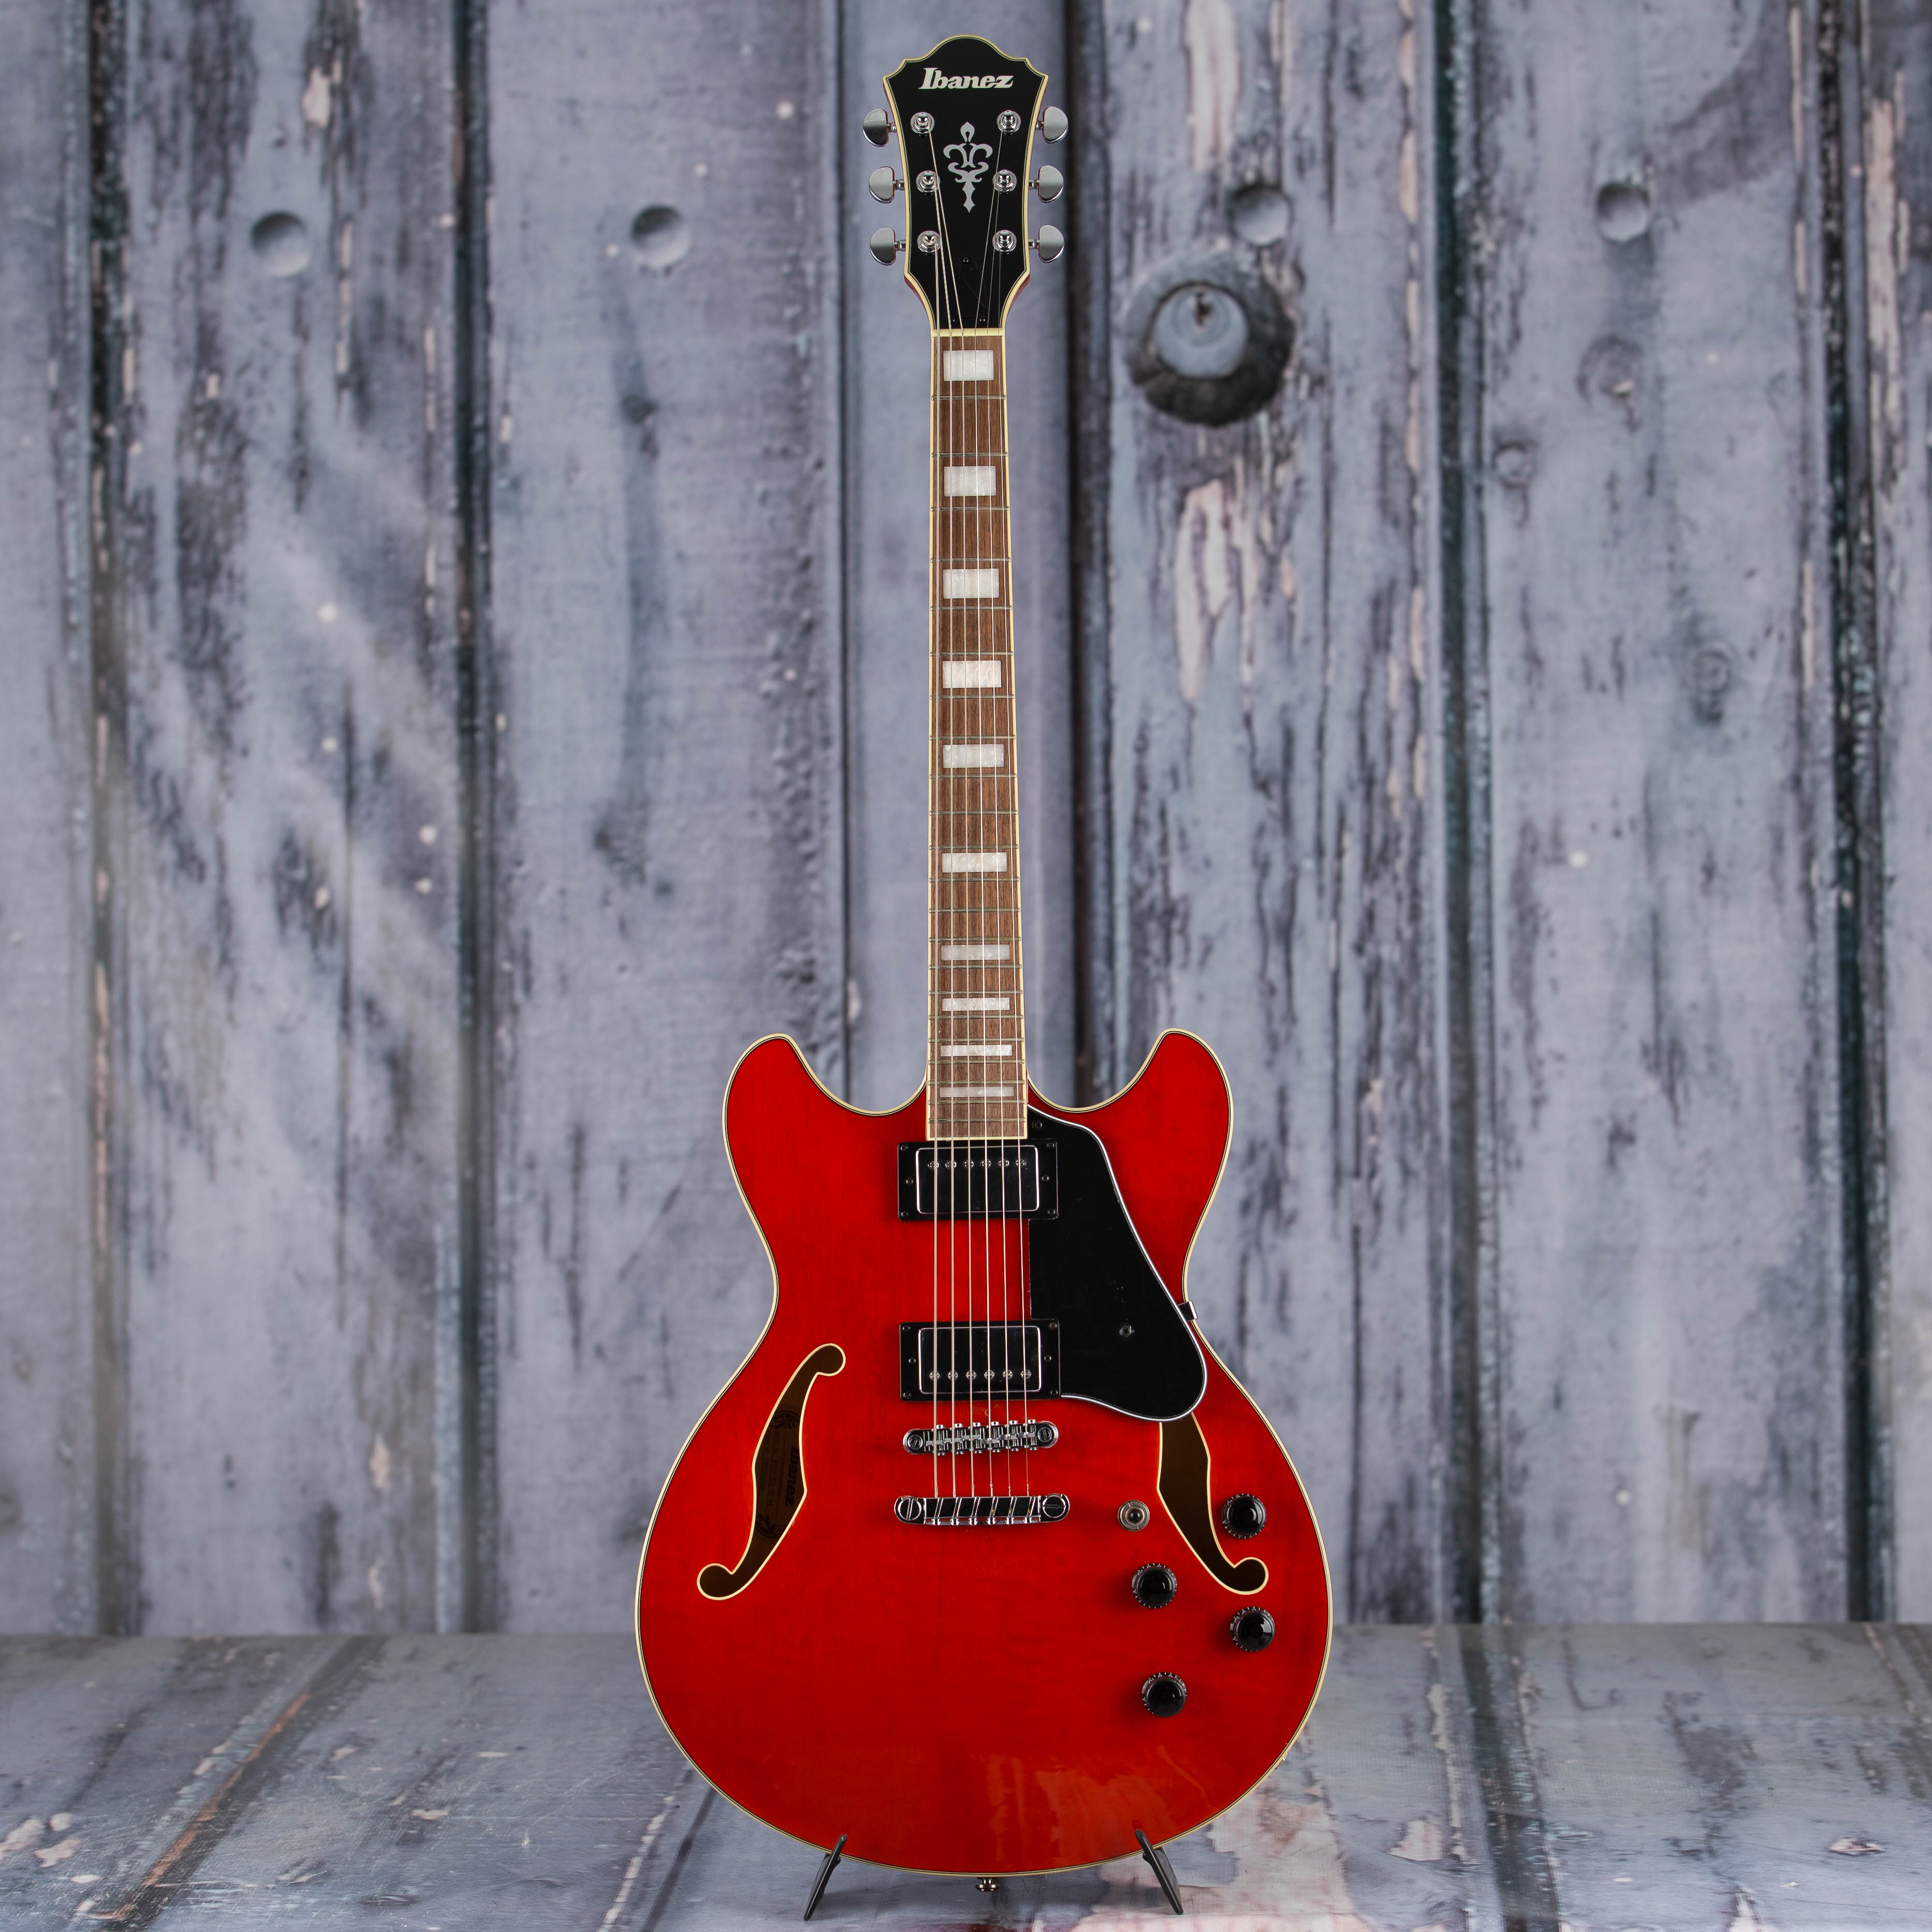 Ibanez Artcore Series AS73 Semi-Hollowbody Guitar, Transparent Cherry Red, front